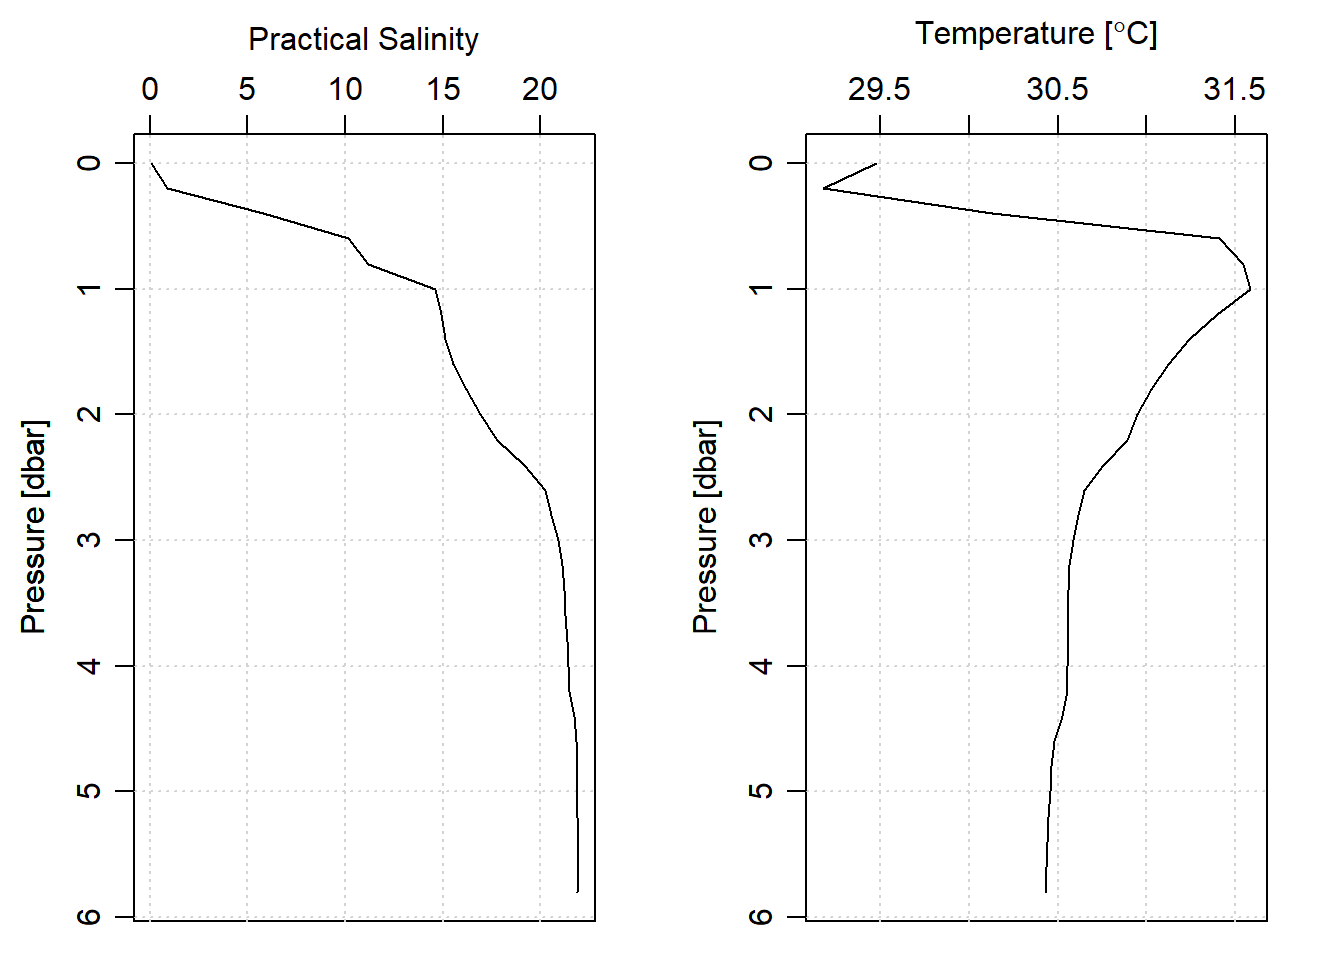 Profile o Salinity and temperature from downcast measurments and aligned to standard depth